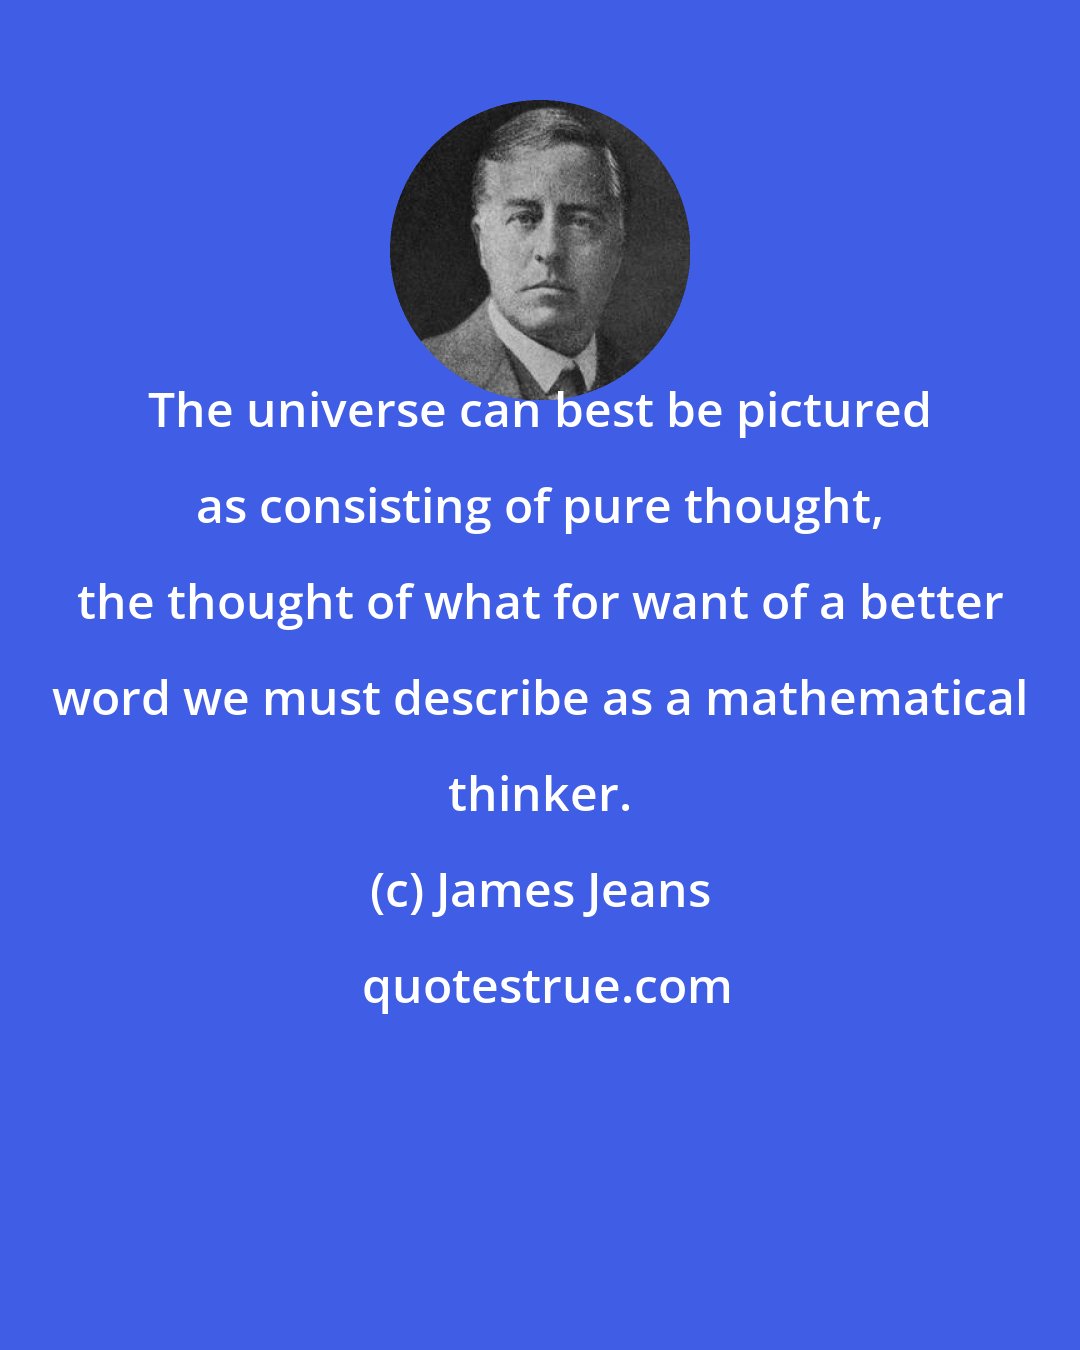 James Jeans: The universe can best be pictured as consisting of pure thought, the thought of what for want of a better word we must describe as a mathematical thinker.